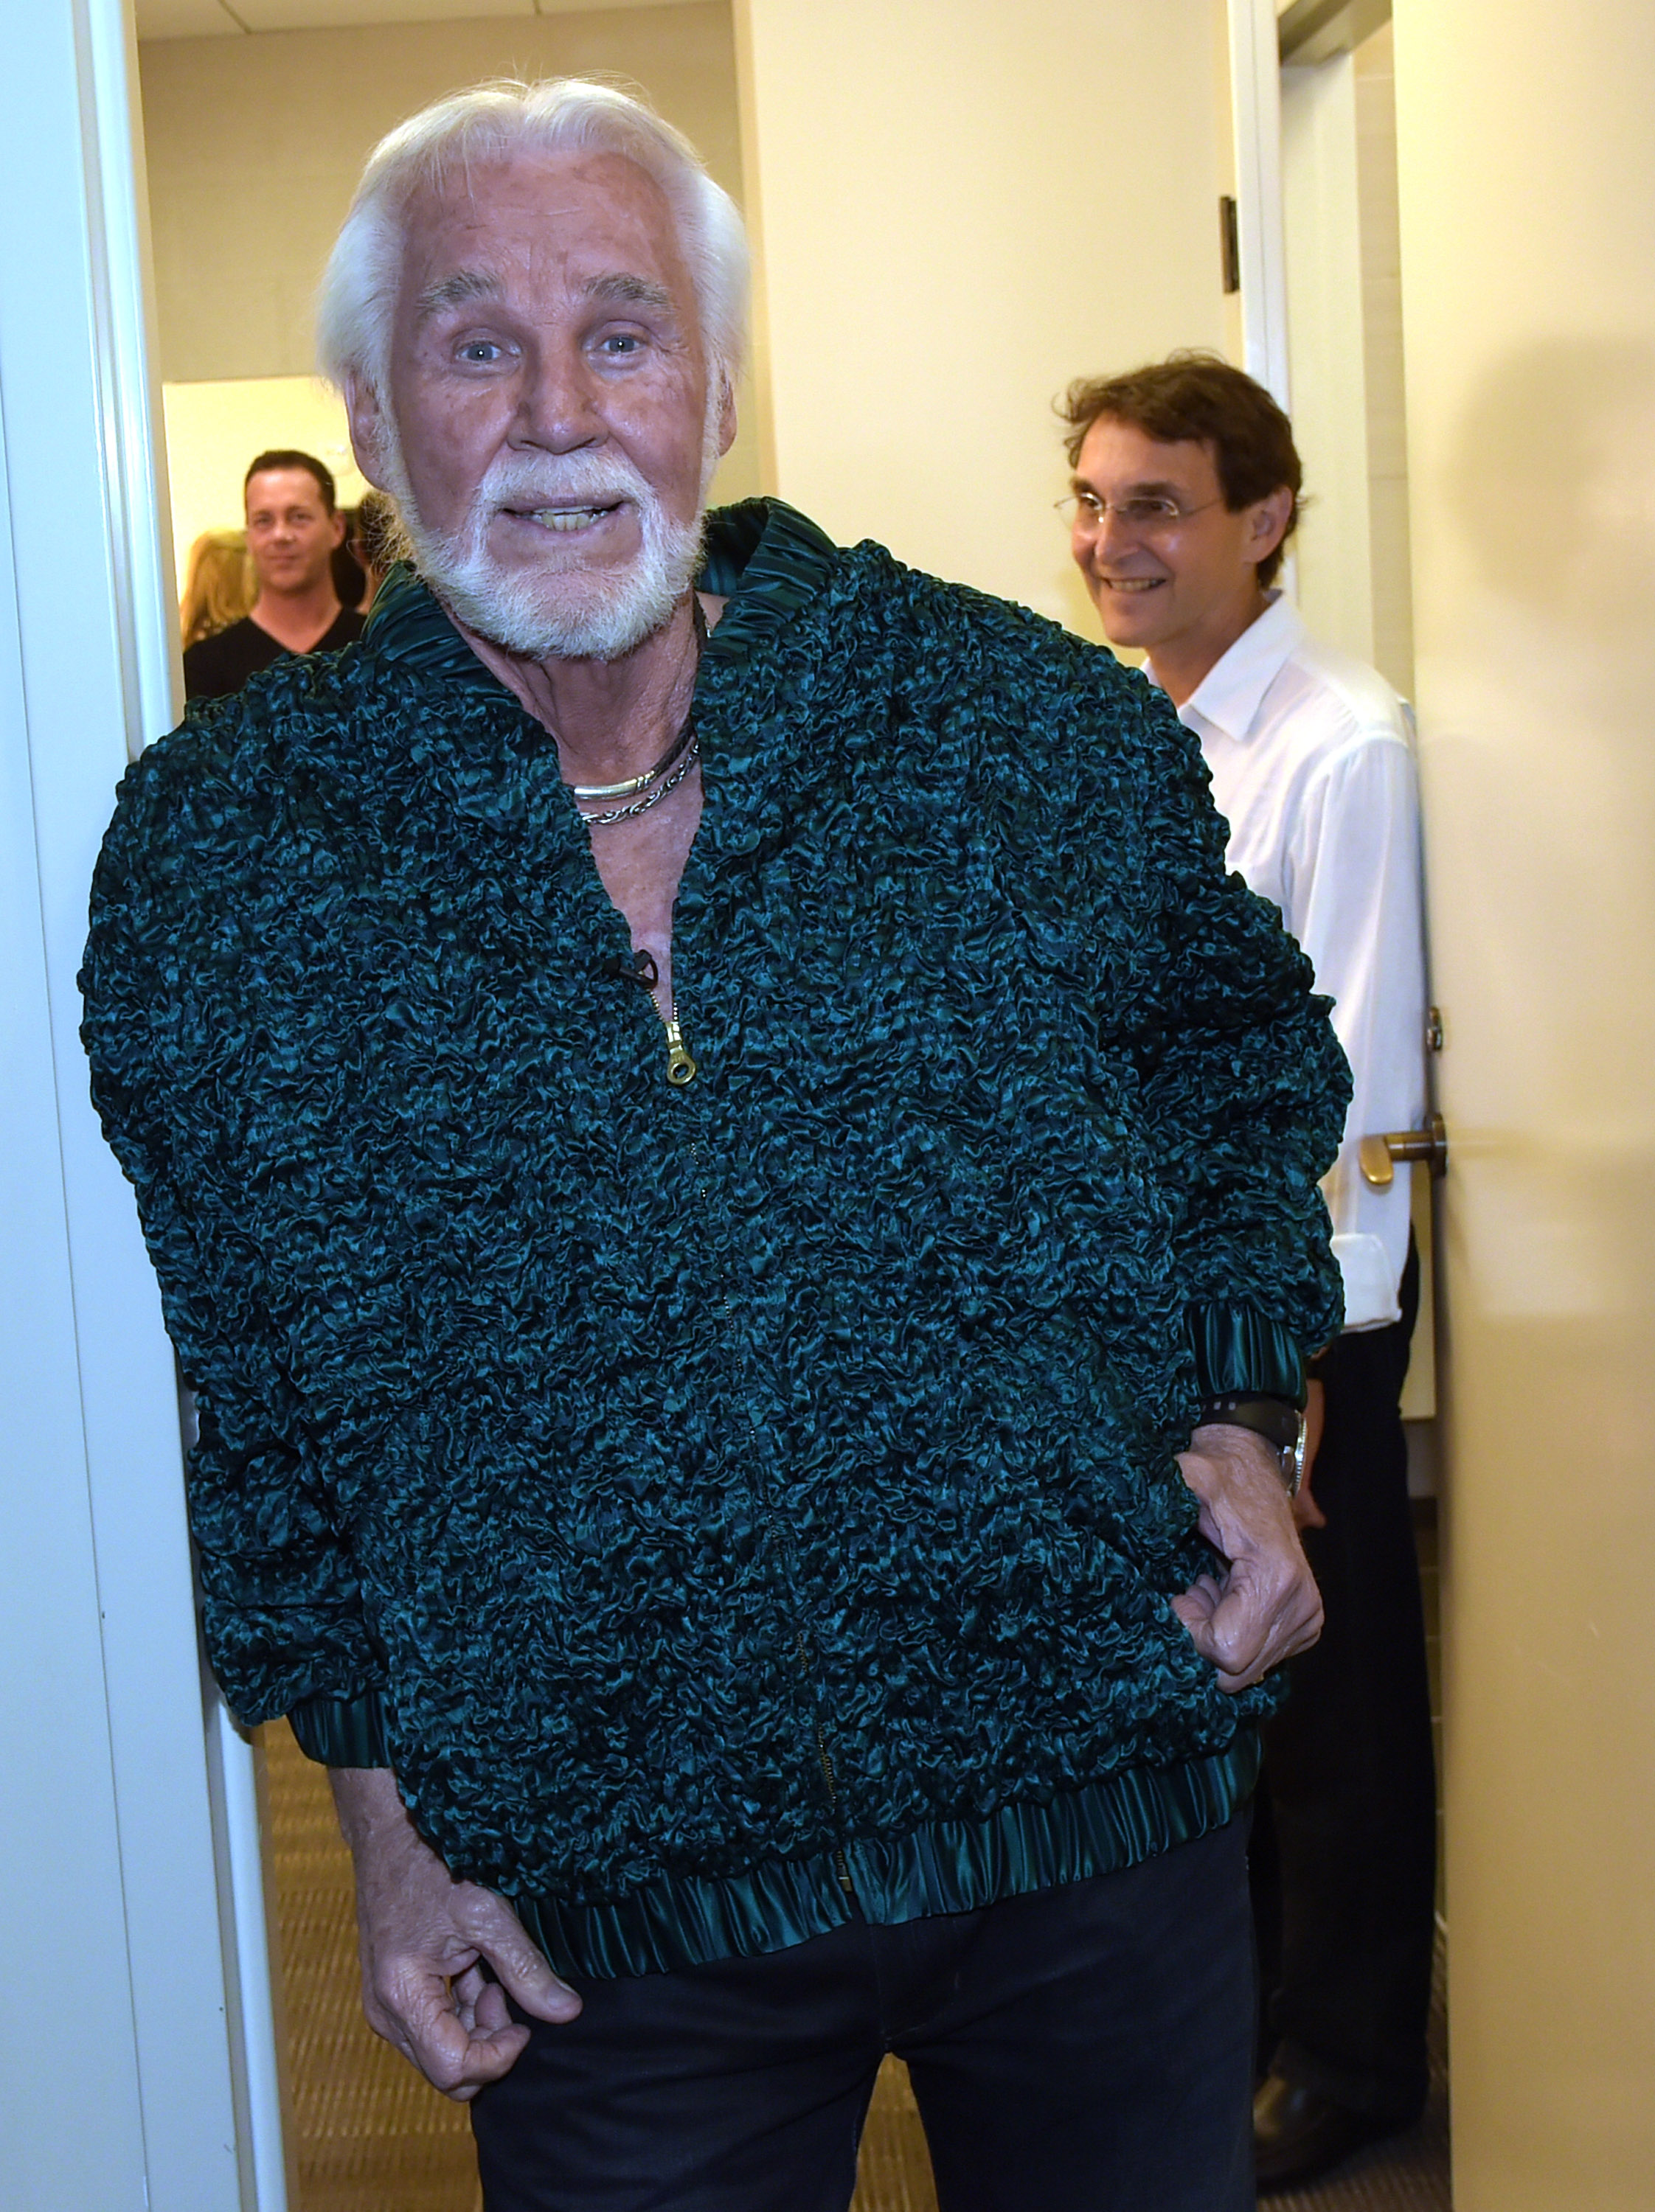 Kenny Rogers in Nashville, Tennessee on August 1, 2014 | Source: Getty Images